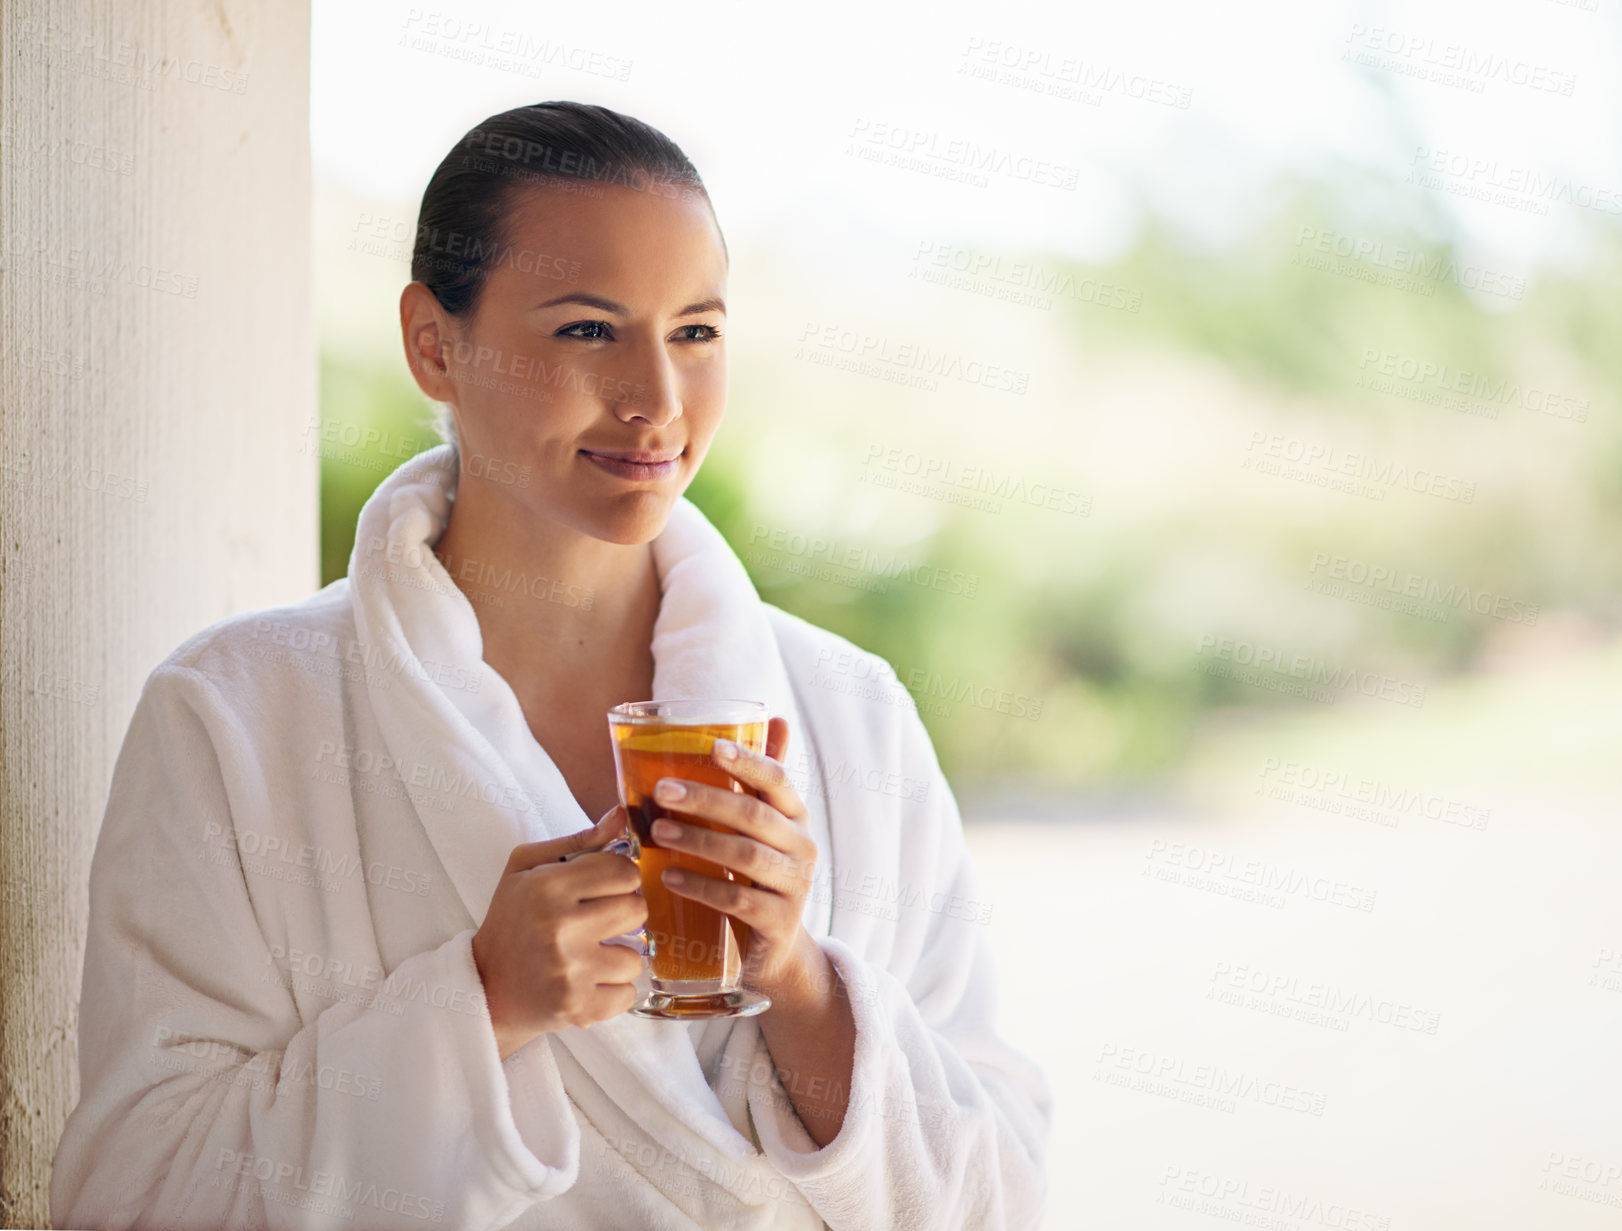 Buy stock photo Shot of a young woman drinking an iced tea at the day spa